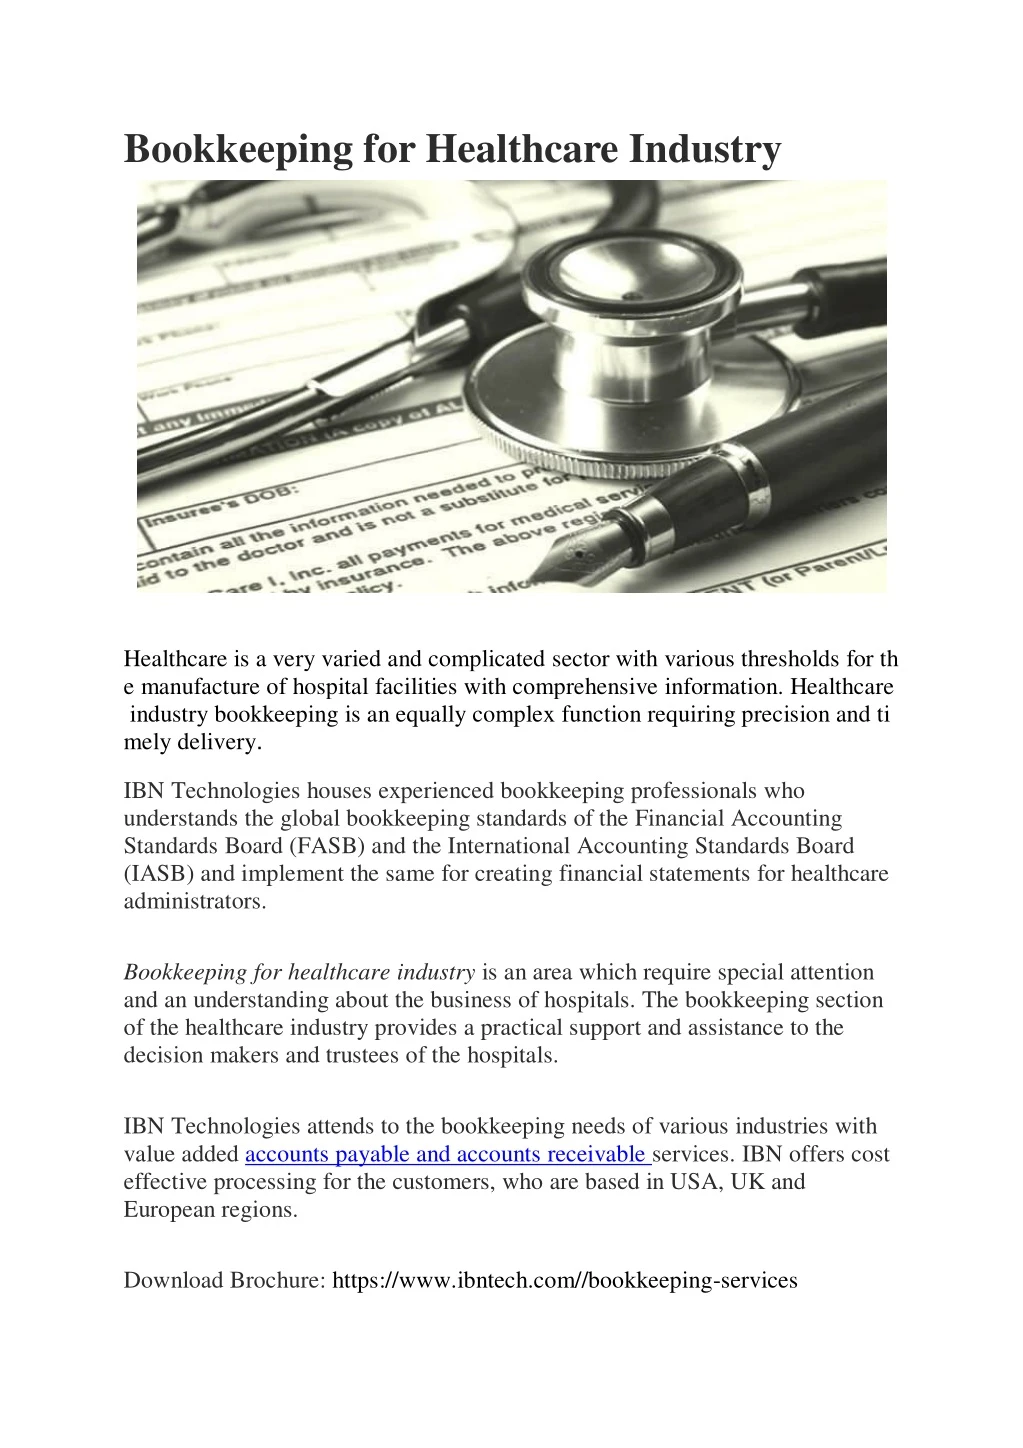 bookkeeping for healthcare industry